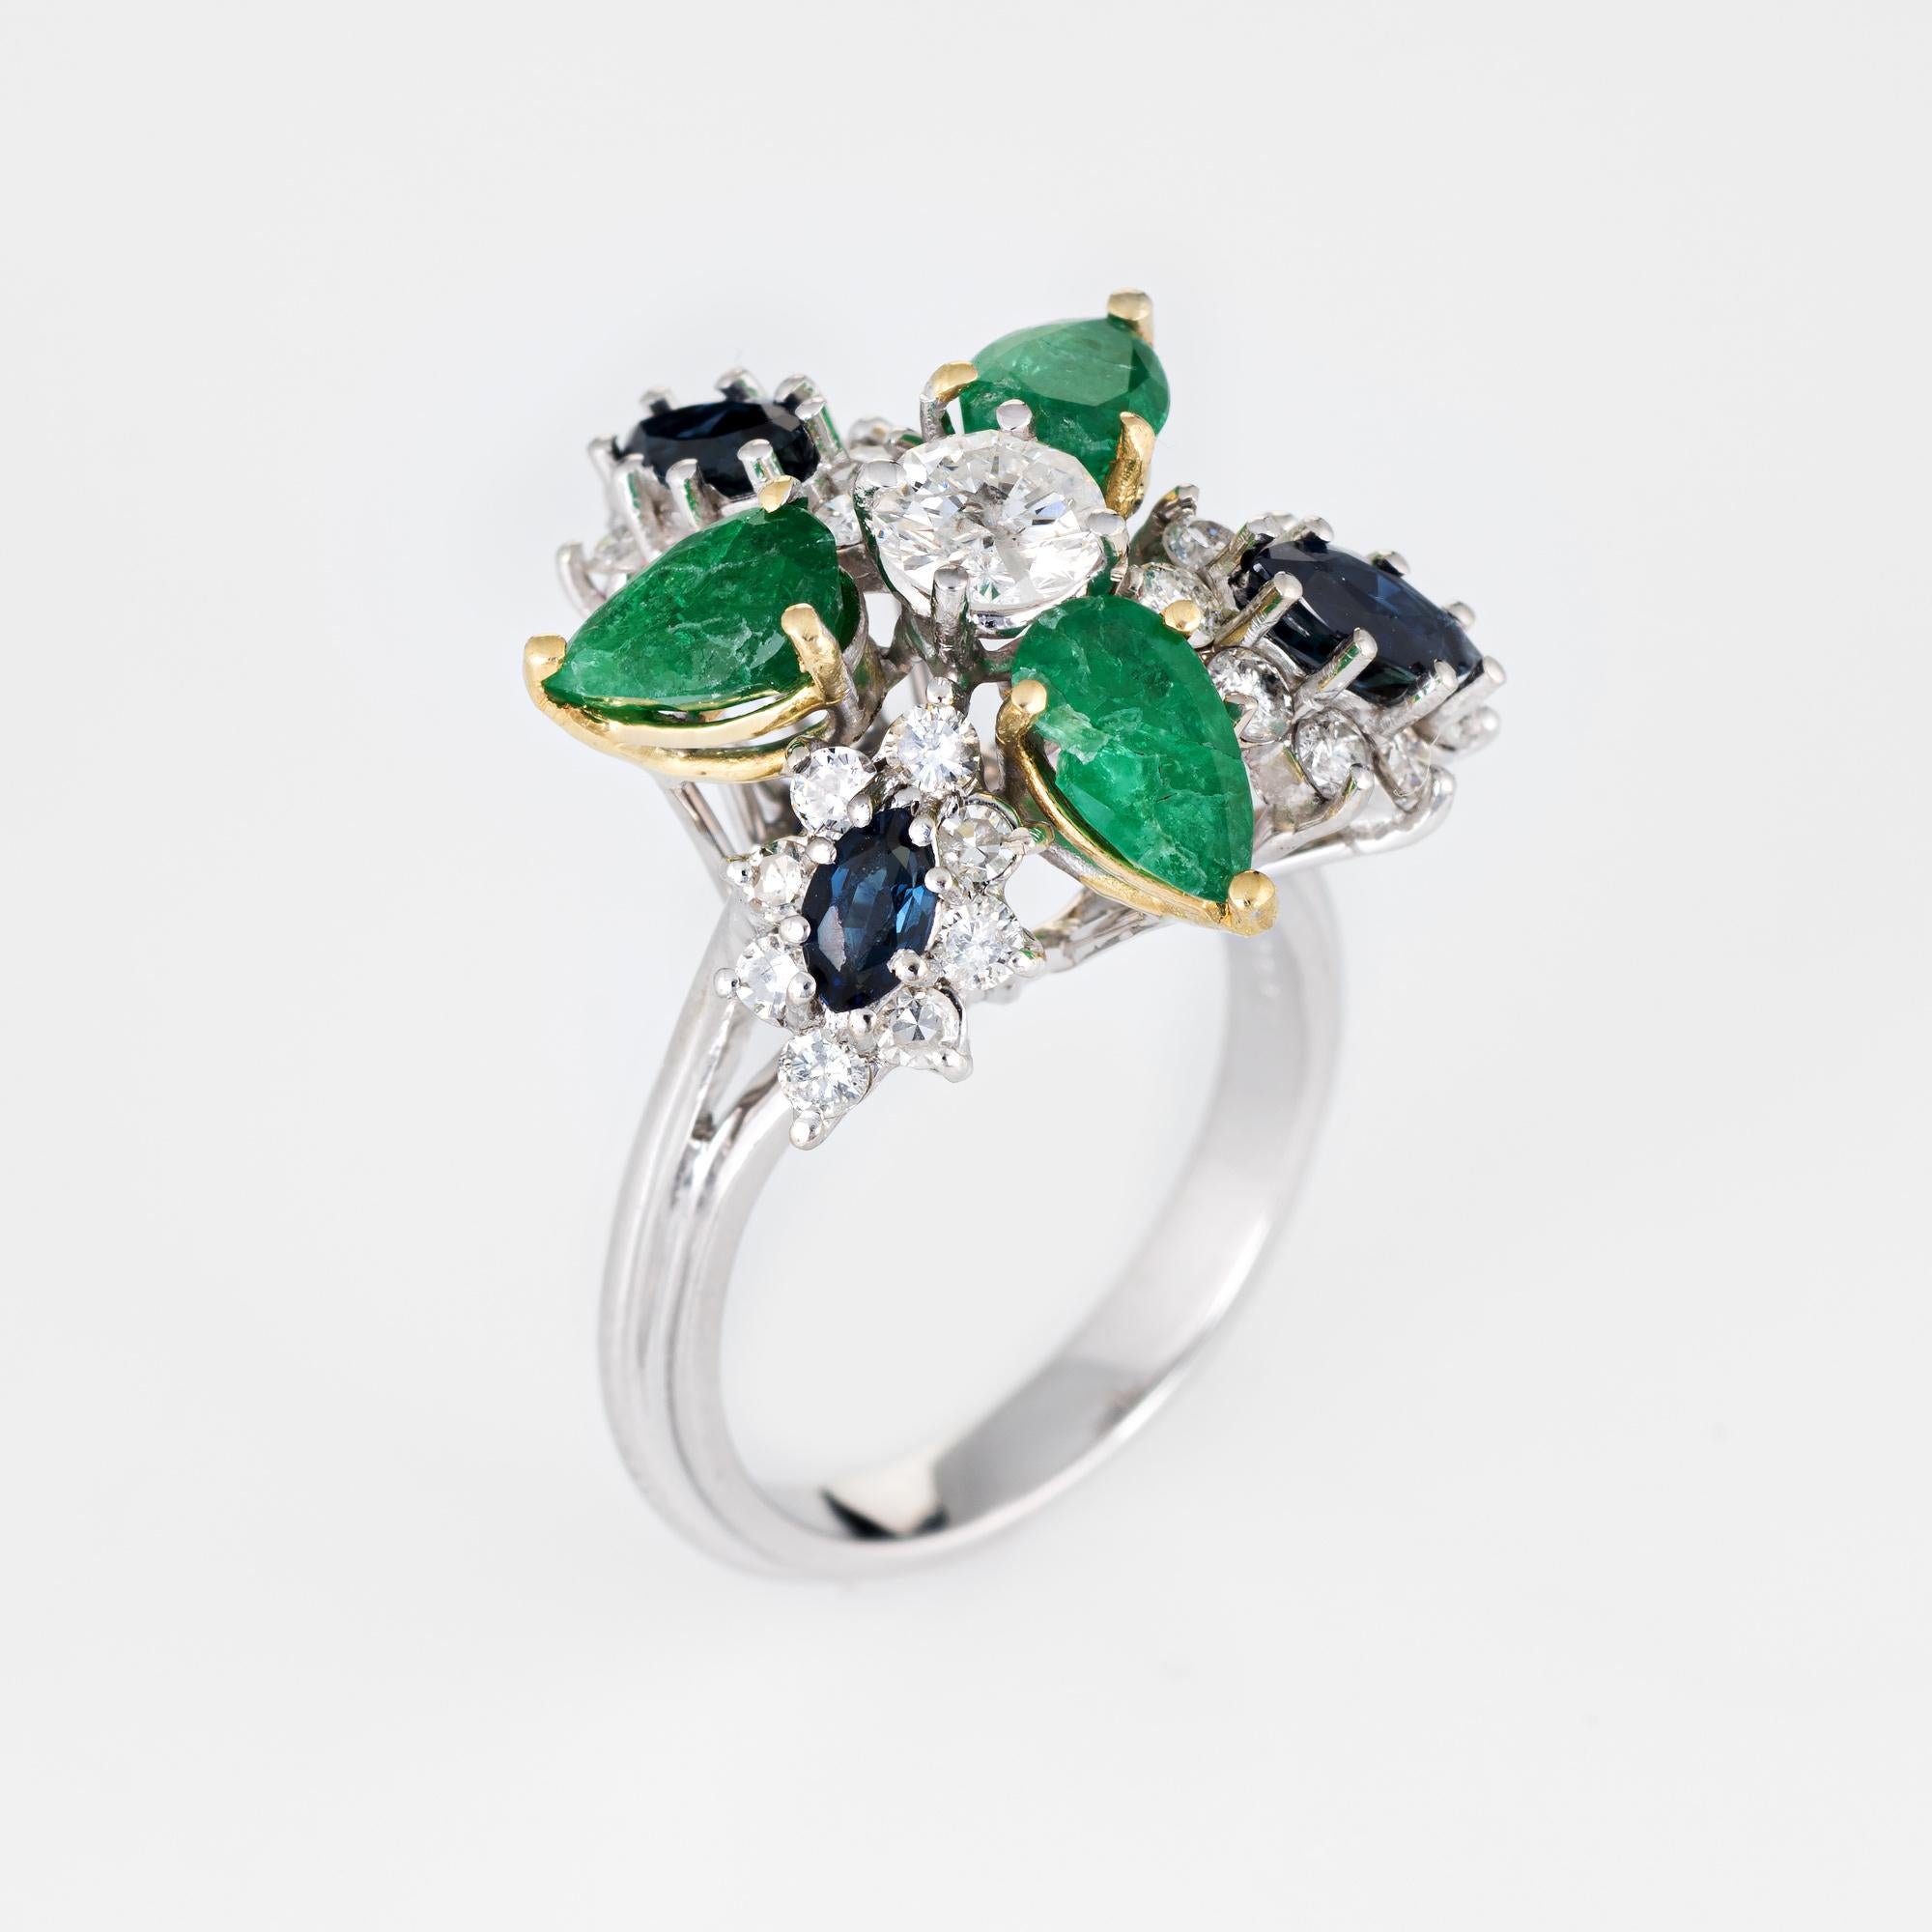 Stylish vintage gemstone cluster ring (circa 1960s to 1970s), crafted in 18 karat white gold. 

Centrally mounted estimated 0.45 carat round brilliant cut diamond is flanked with a further 24 estimated 0.03 carat diamonds. The total diamond weight